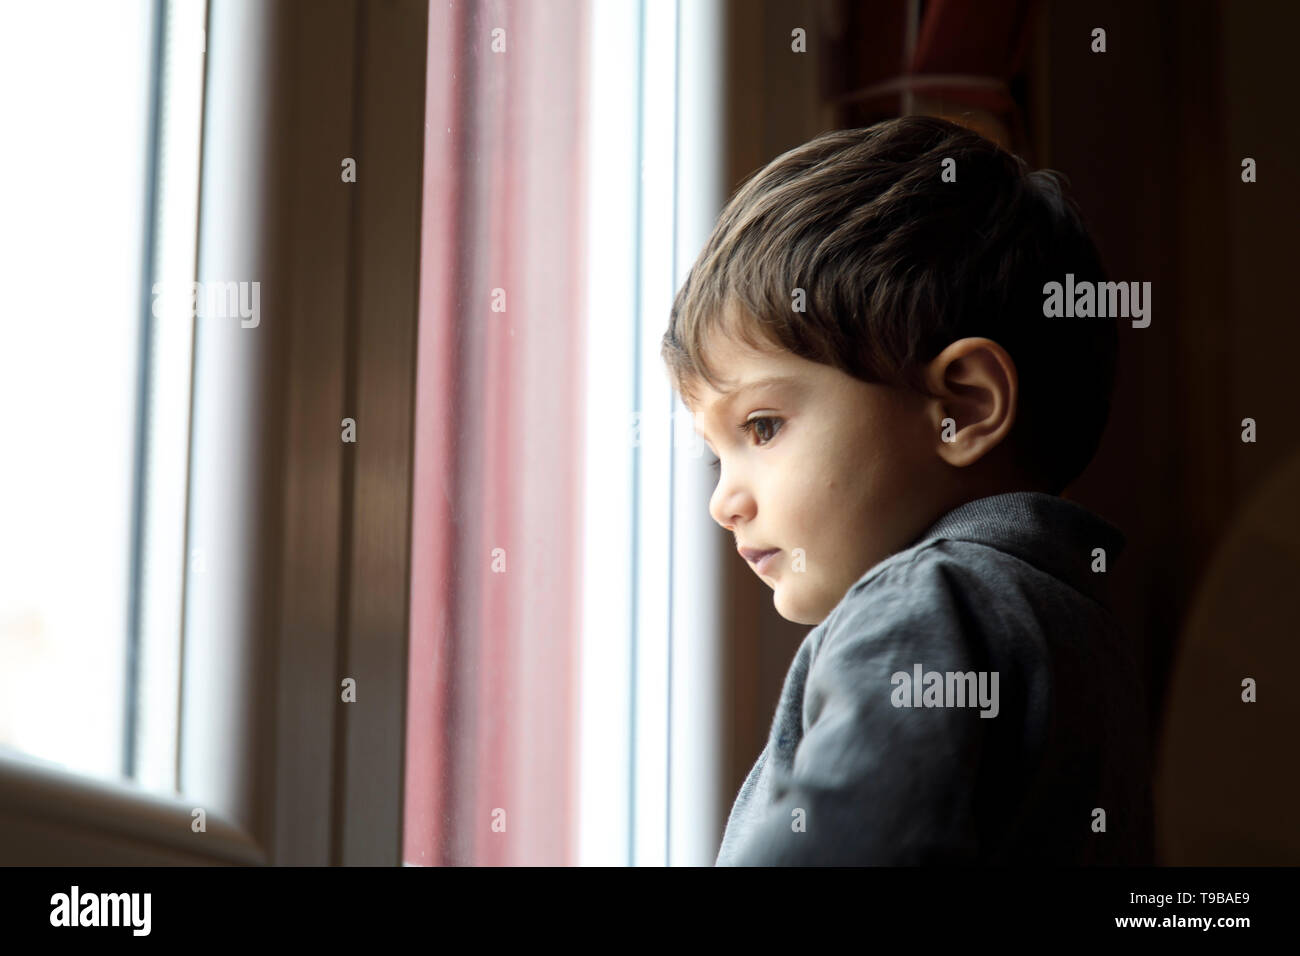 Baby Boy looking through glass window Banque D'Images